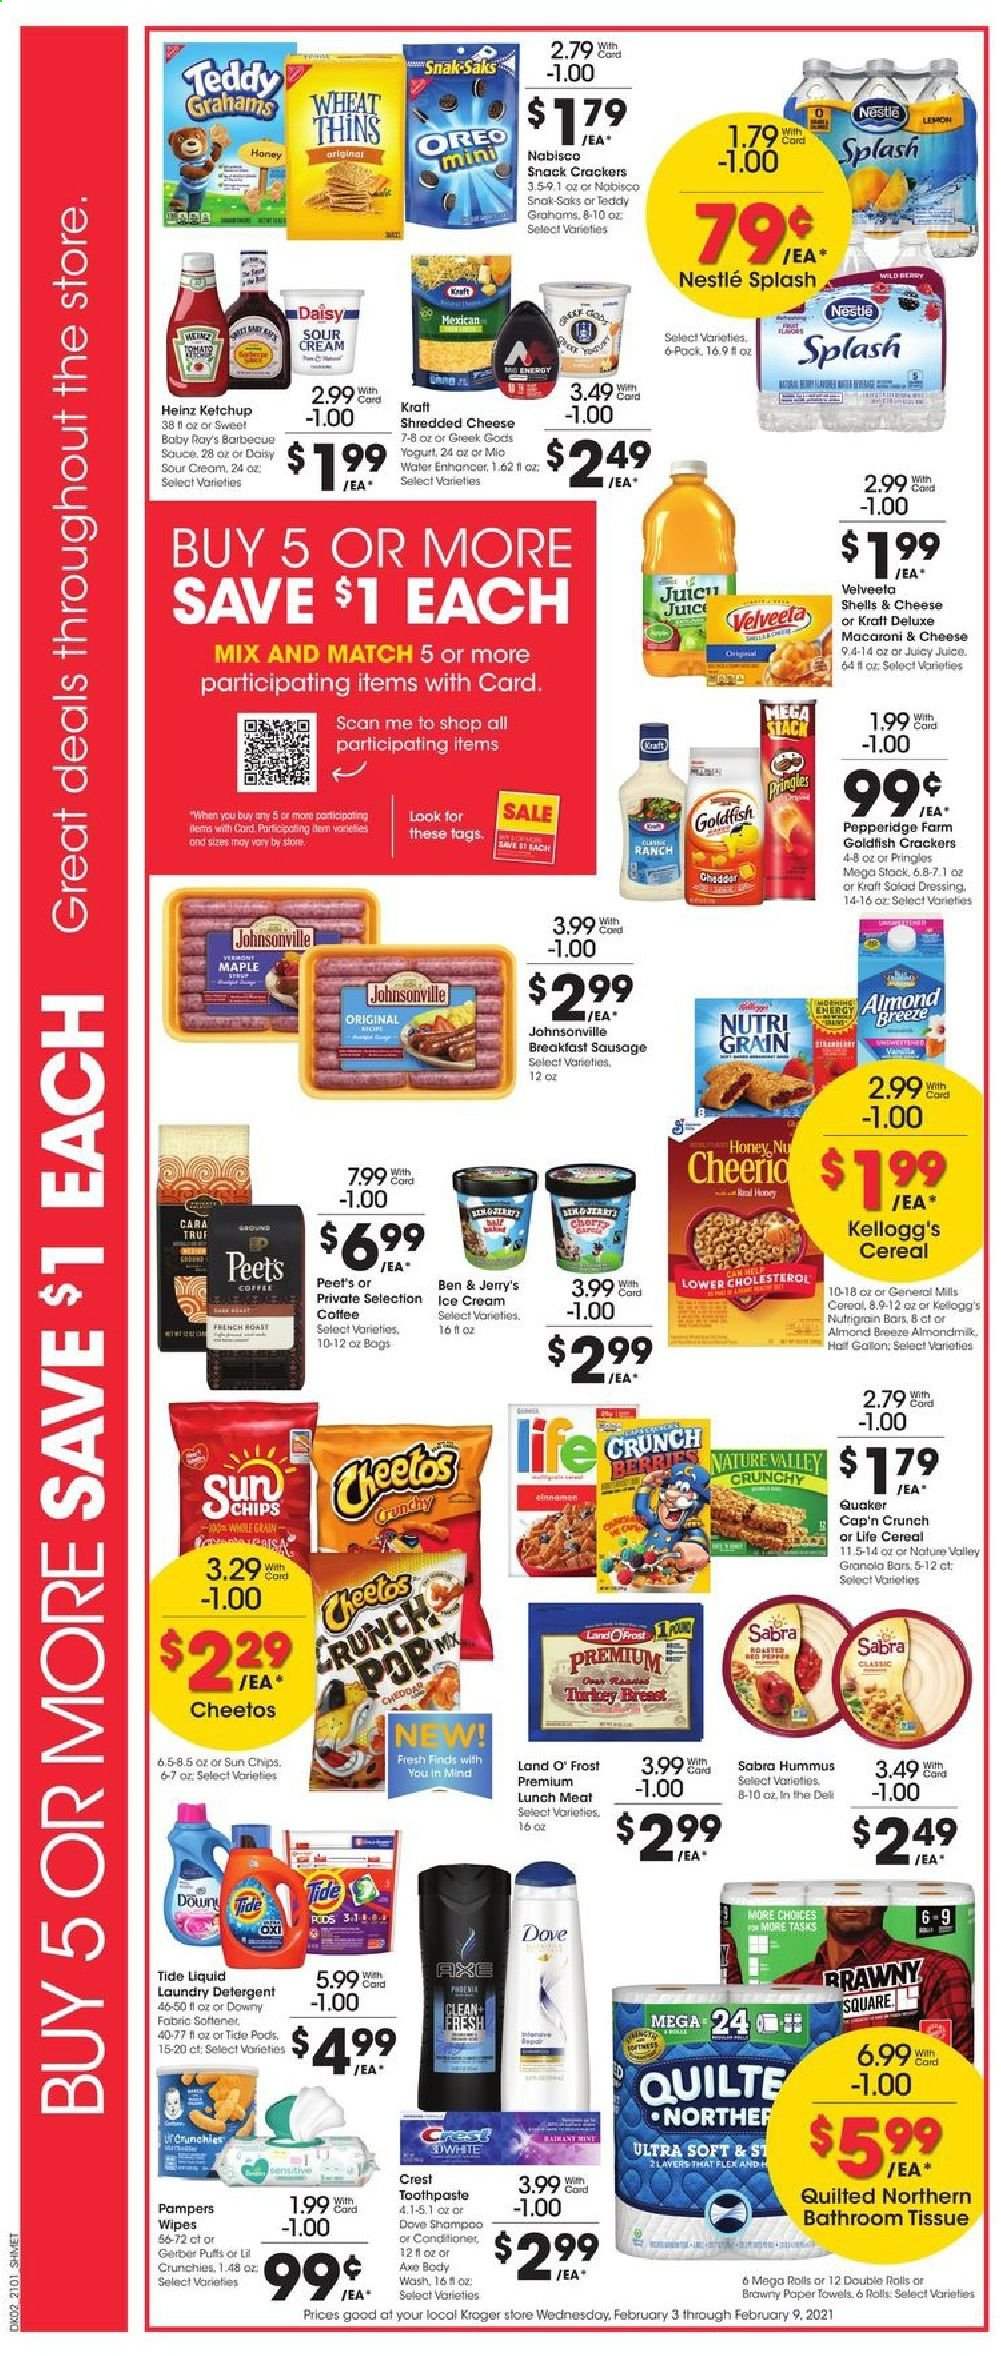 thumbnail - Kroger Flyer - 02/03/2021 - 02/09/2021 - Sales products - Johnsonville, puffs, cod, macaroni & cheese, Quaker, Kraft®, sausage, hummus, lunch meat, shredded cheese, Oreo, yoghurt, Almond Breeze, almond milk, lard, sour cream, ice cream, Ben & Jerry's, Nestlé, crackers, Gerber, Pringles, Cheetos, chips, snack, Thins, Goldfish, Heinz, cereals, granola bar, Cap'n Crunch, Nature Valley, Nutri-Grain, ketchup, dressing, honey, juice, coffee, turkey breast, Pampers, Dove, bath tissue, Quilted Northern, tissues, kitchen towels, paper towels, detergent, wipes, Tide, laundry detergent, body wash, shampoo, toothpaste, Crest, conditioner, cap, teddy. Page 3.